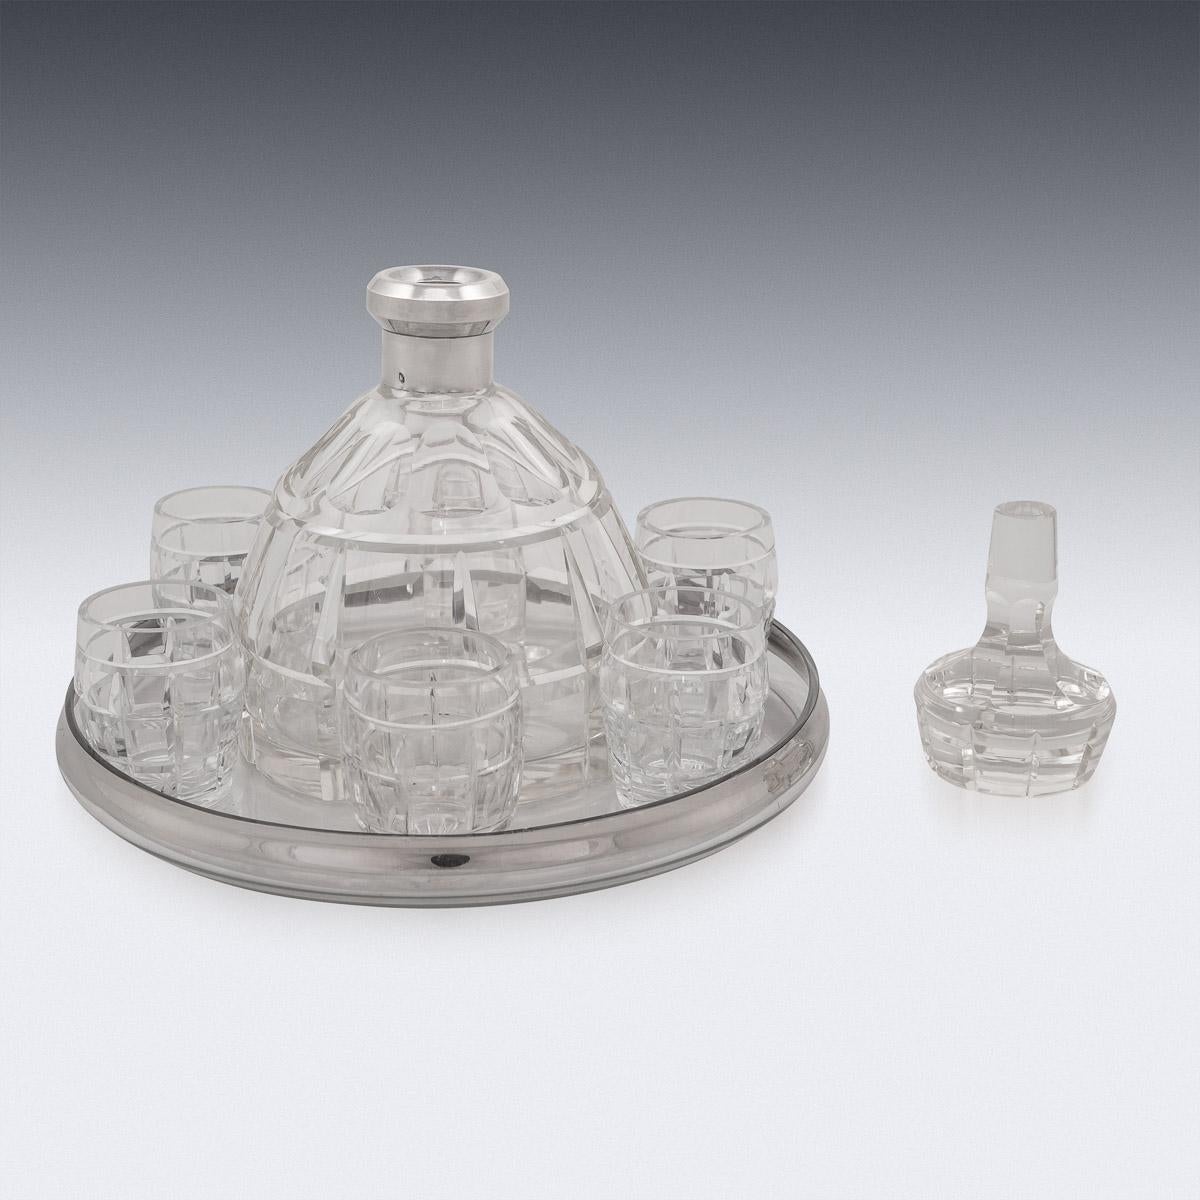 Stylish mid-20th century French solid silver mounted on glass decanter, 6 shot glasses and a tray. Of very unusual design, imitating the shape and pattern of a hand grenade, mid-size with deep cut glass body and mounted with a geometrical stopper.